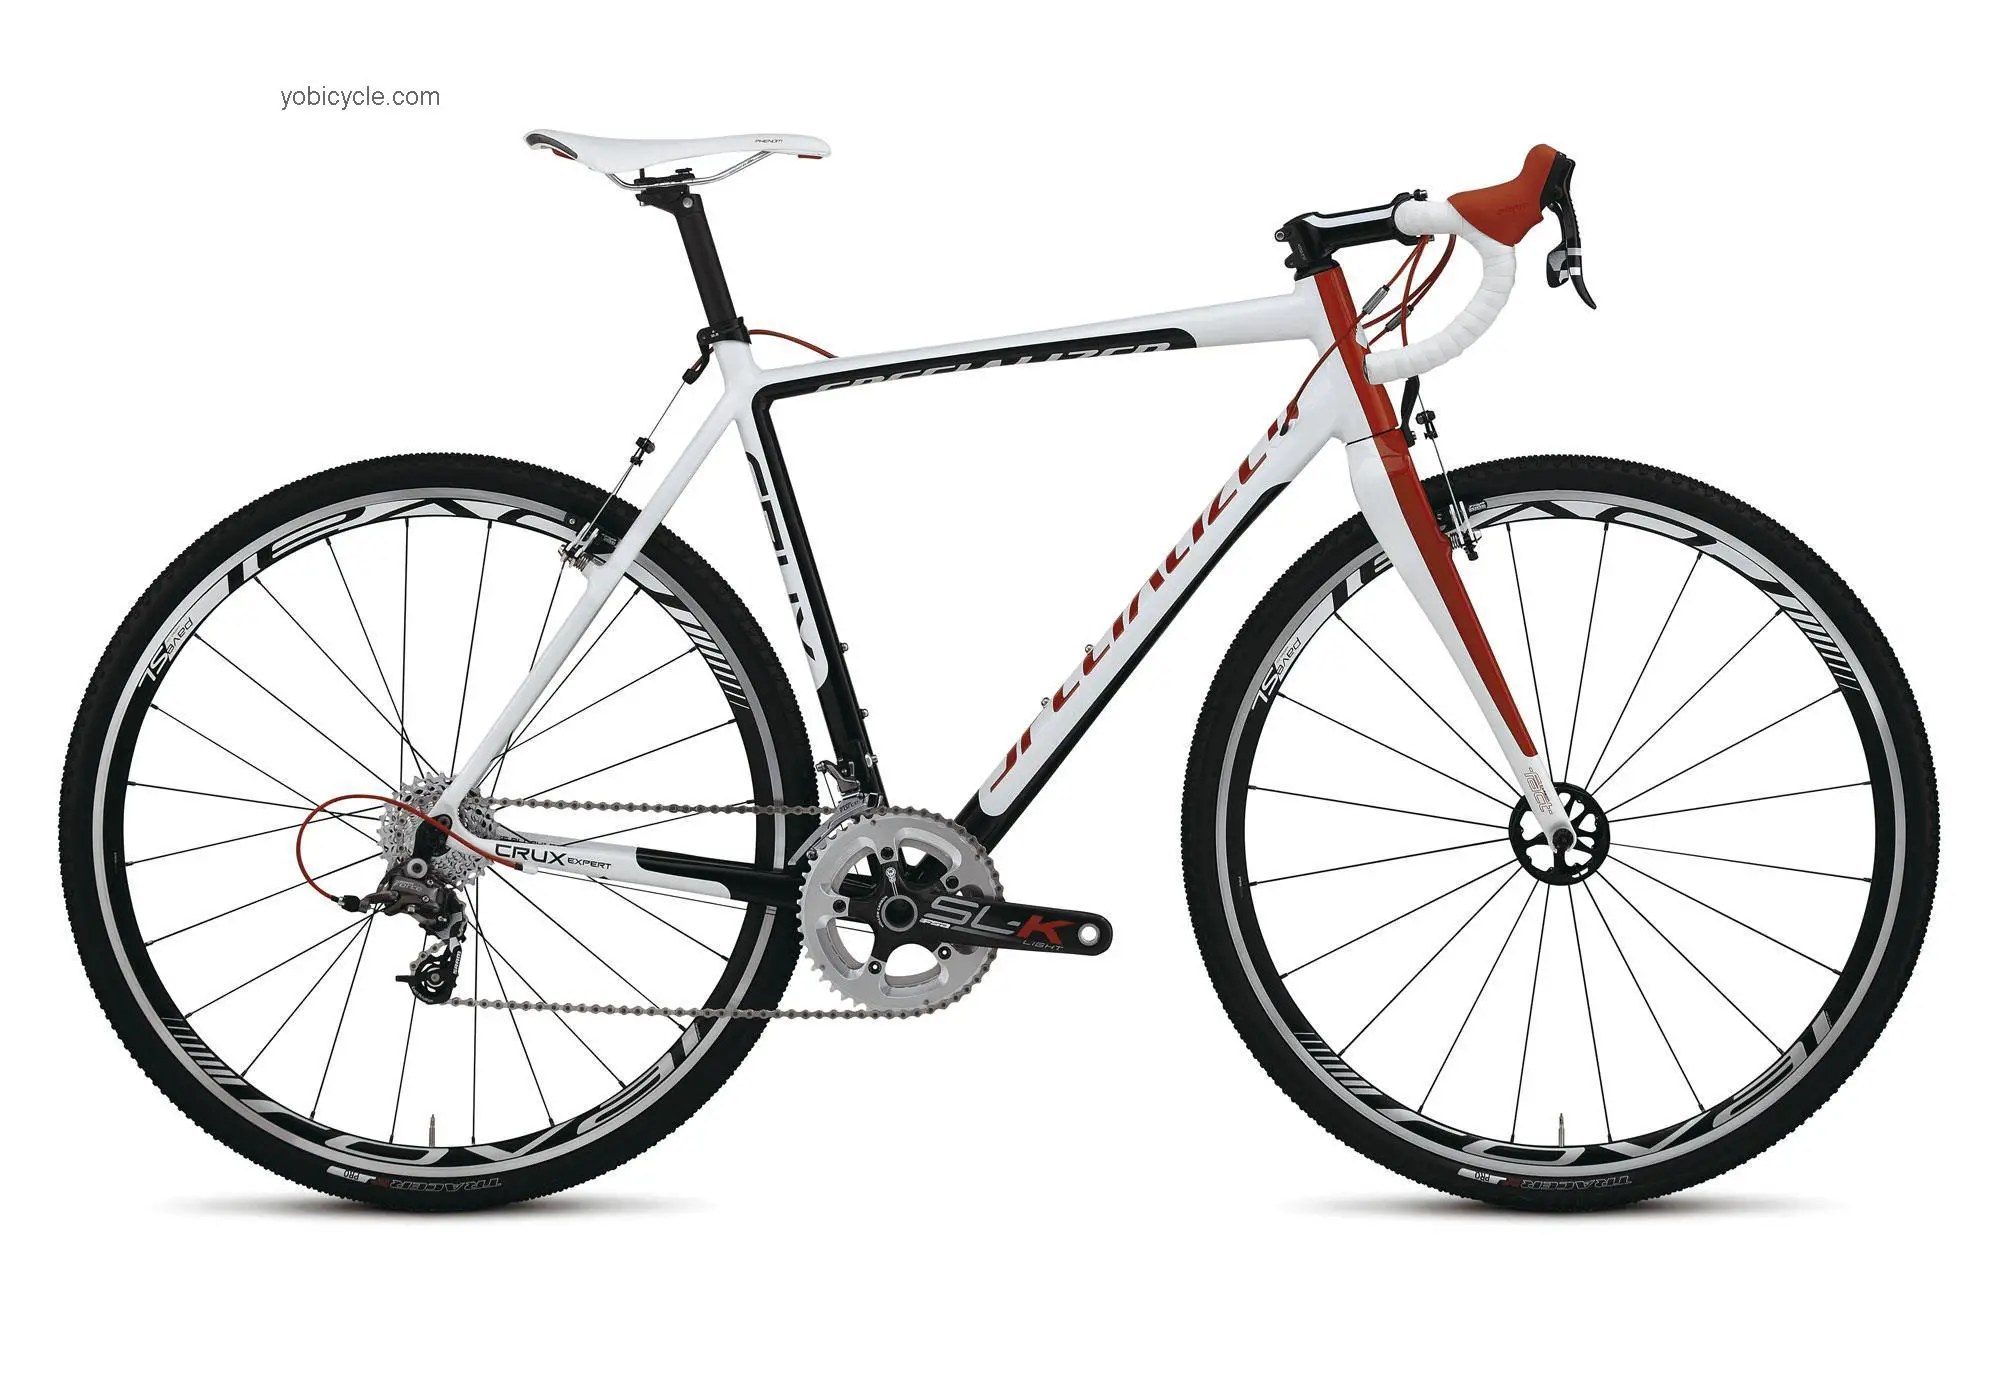 Specialized Crux Expert 2012 comparison online with competitors